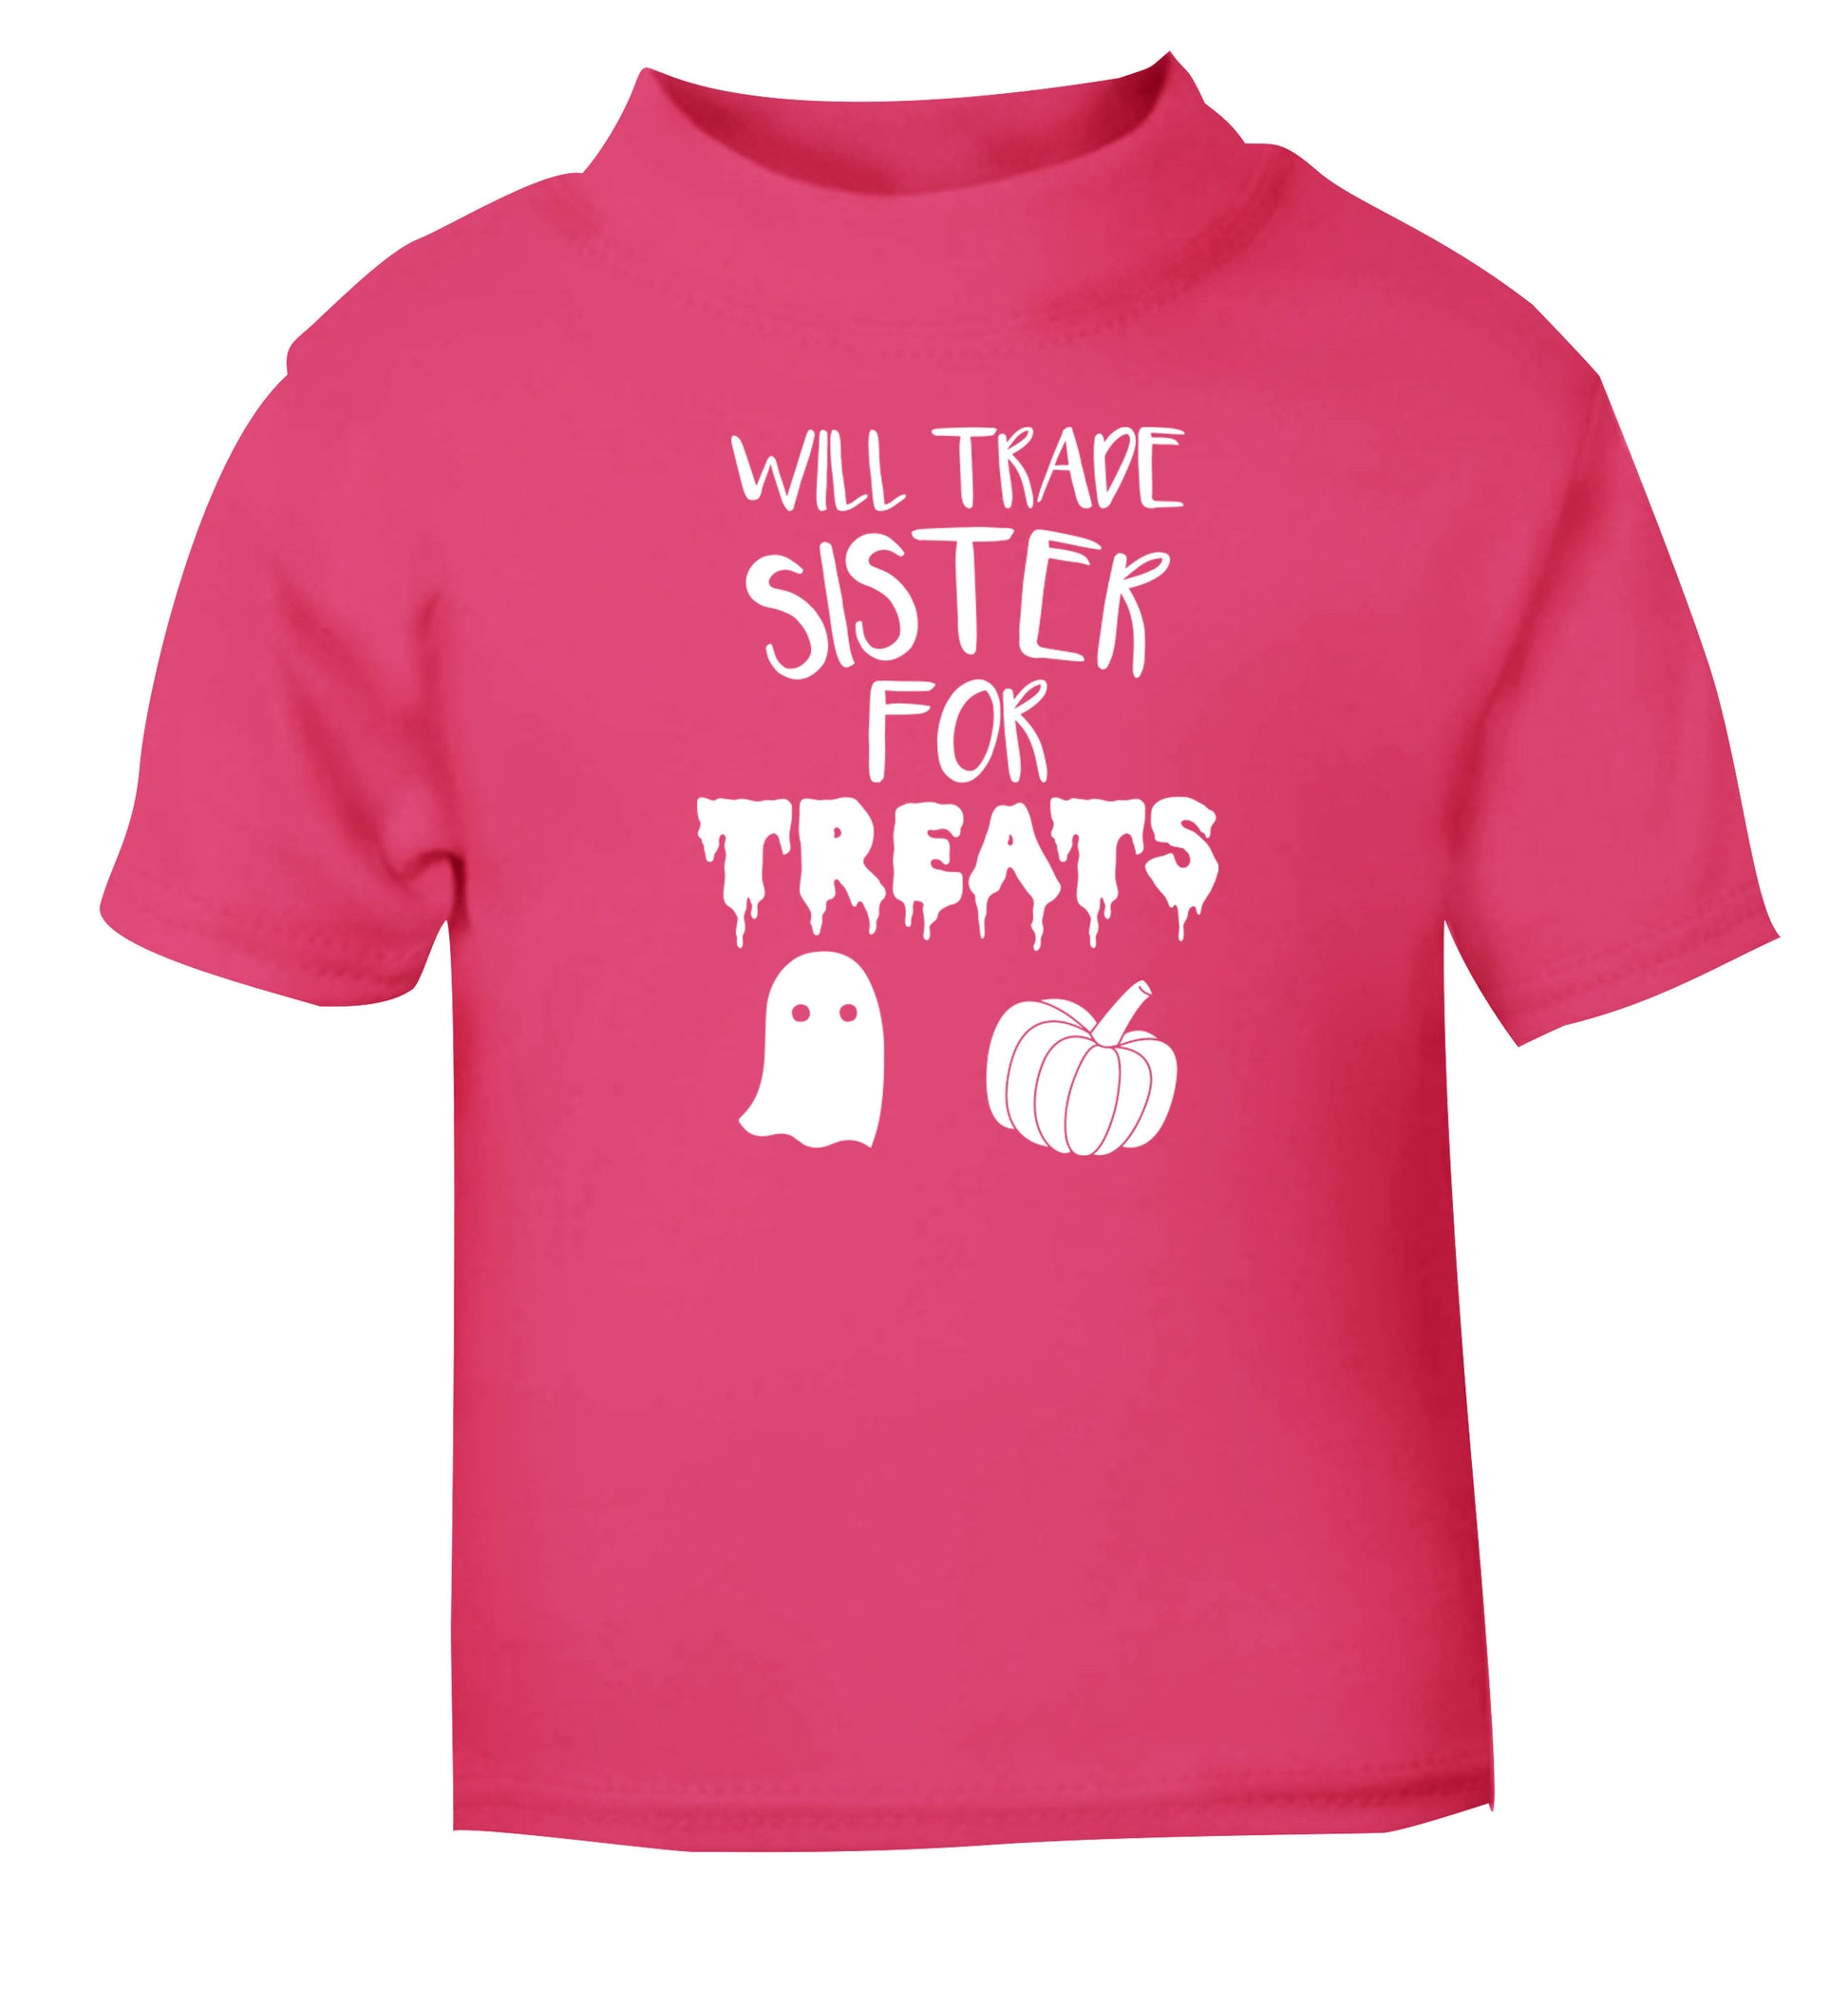 Will trade sister for treats pink Baby Toddler Tshirt 2 Years